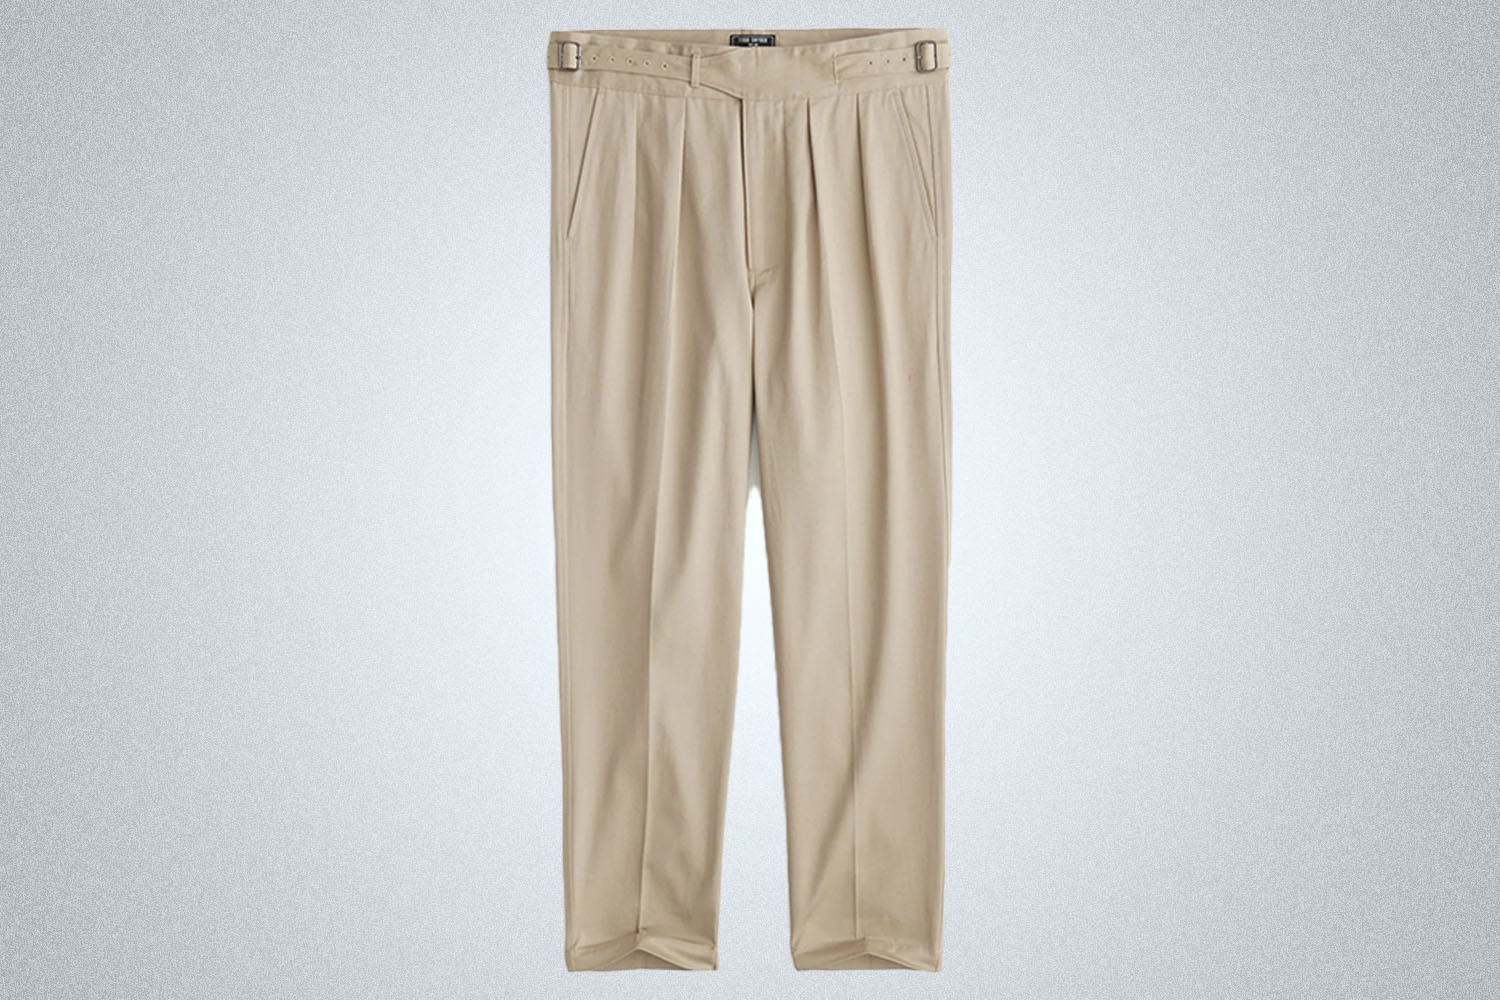 Snickers 3311 CoolTwill Trousers